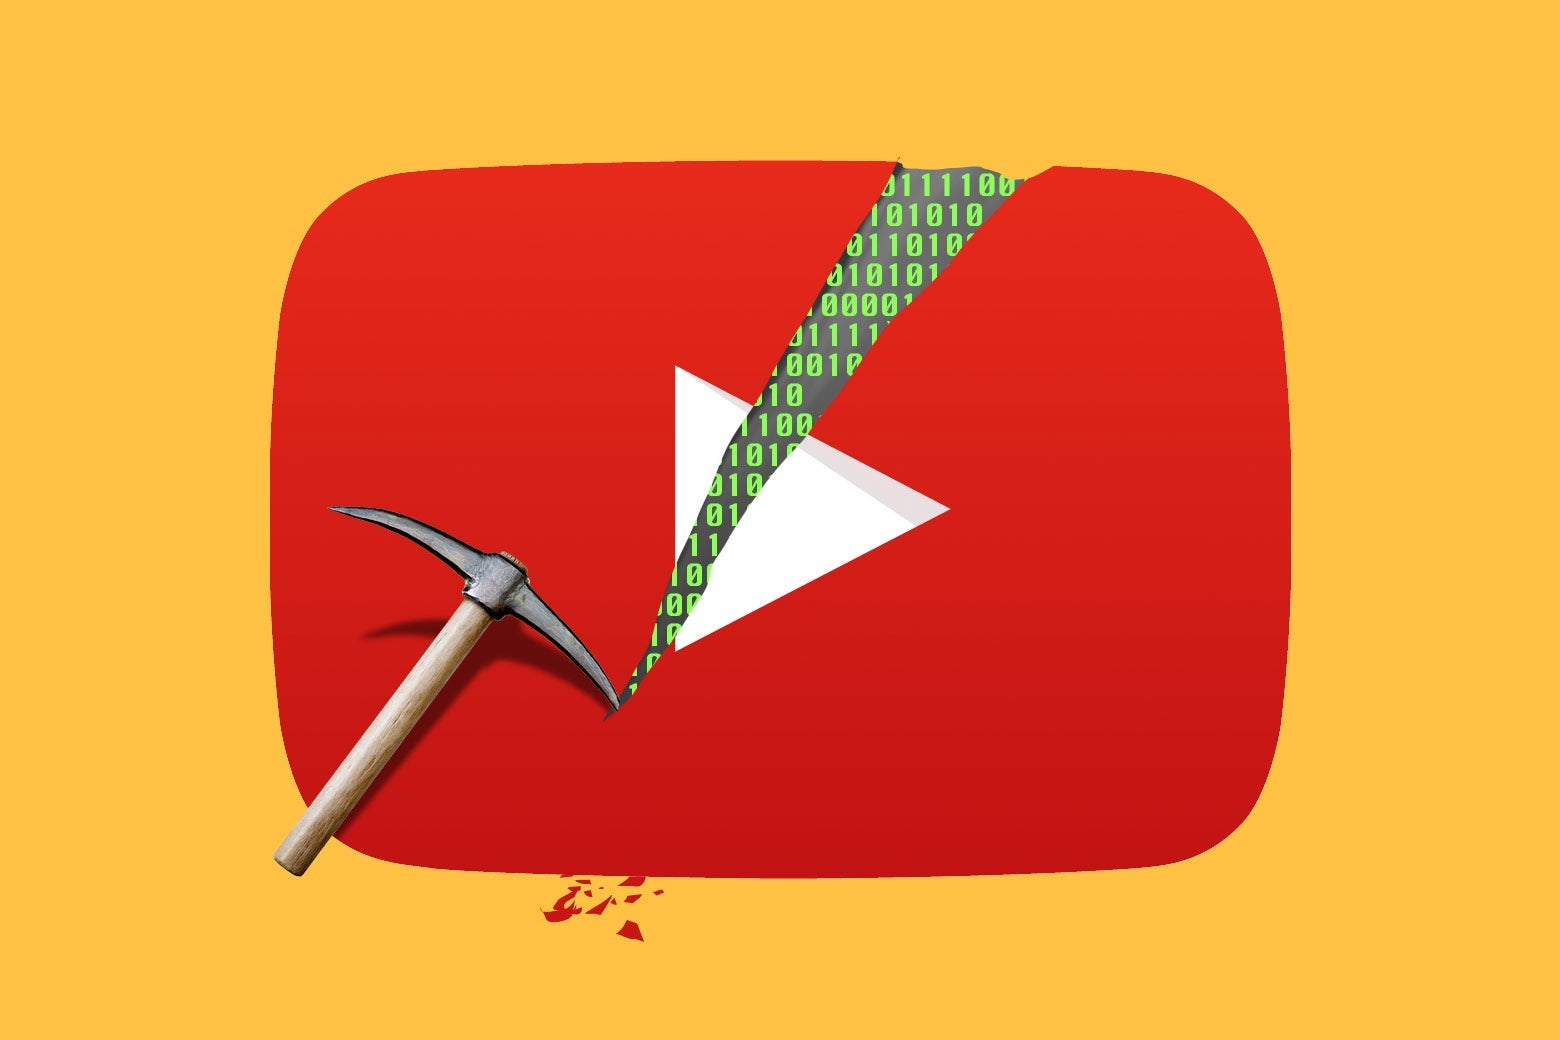 Photo illustration of a pickax cutting a hole of into the YouTube logo revealing 0's and 1's. 